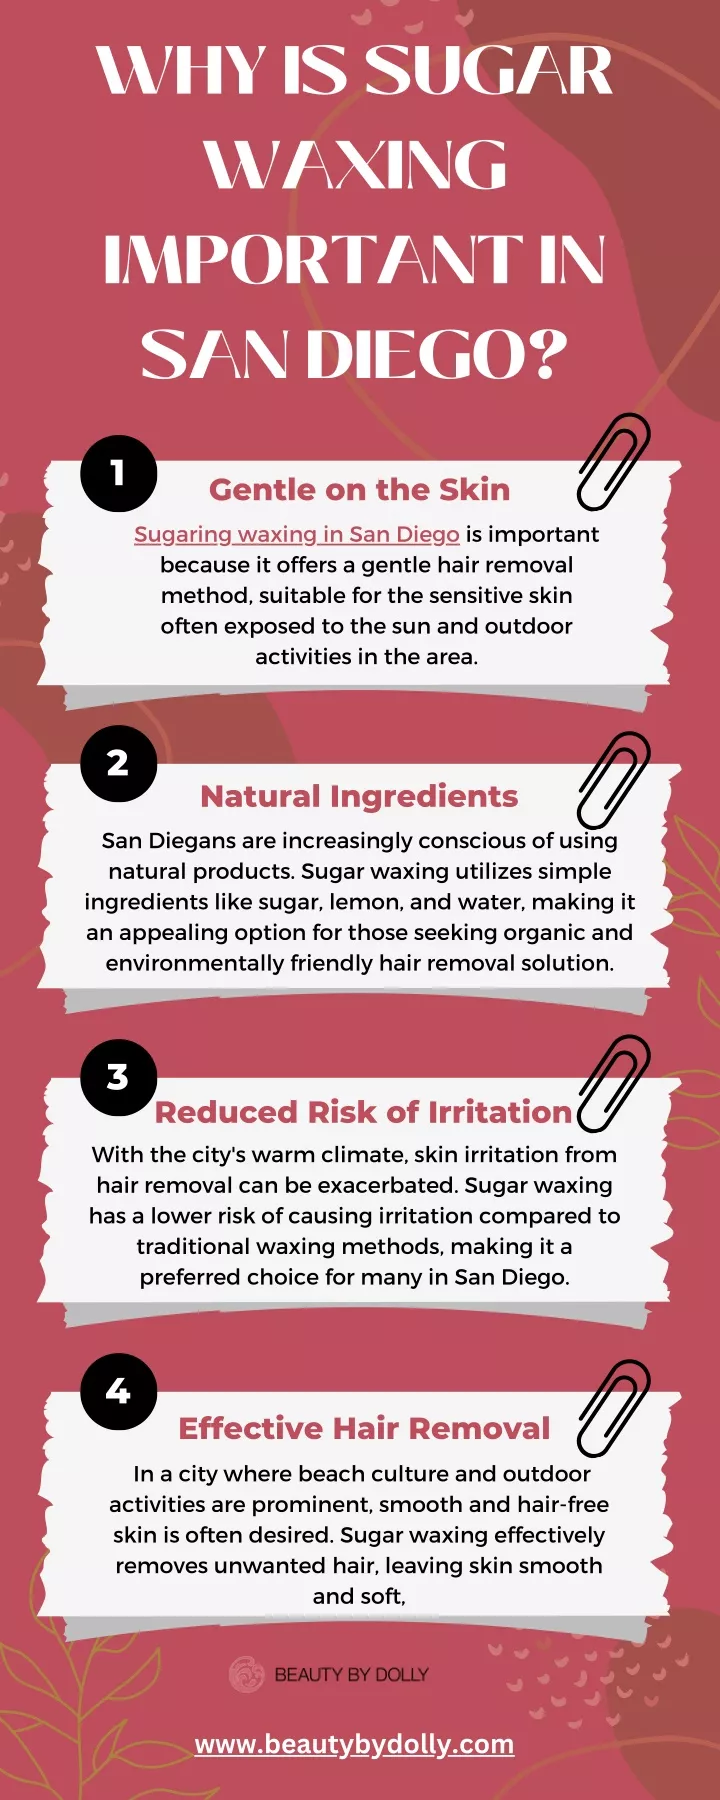 why is sugar waxing important in san diego